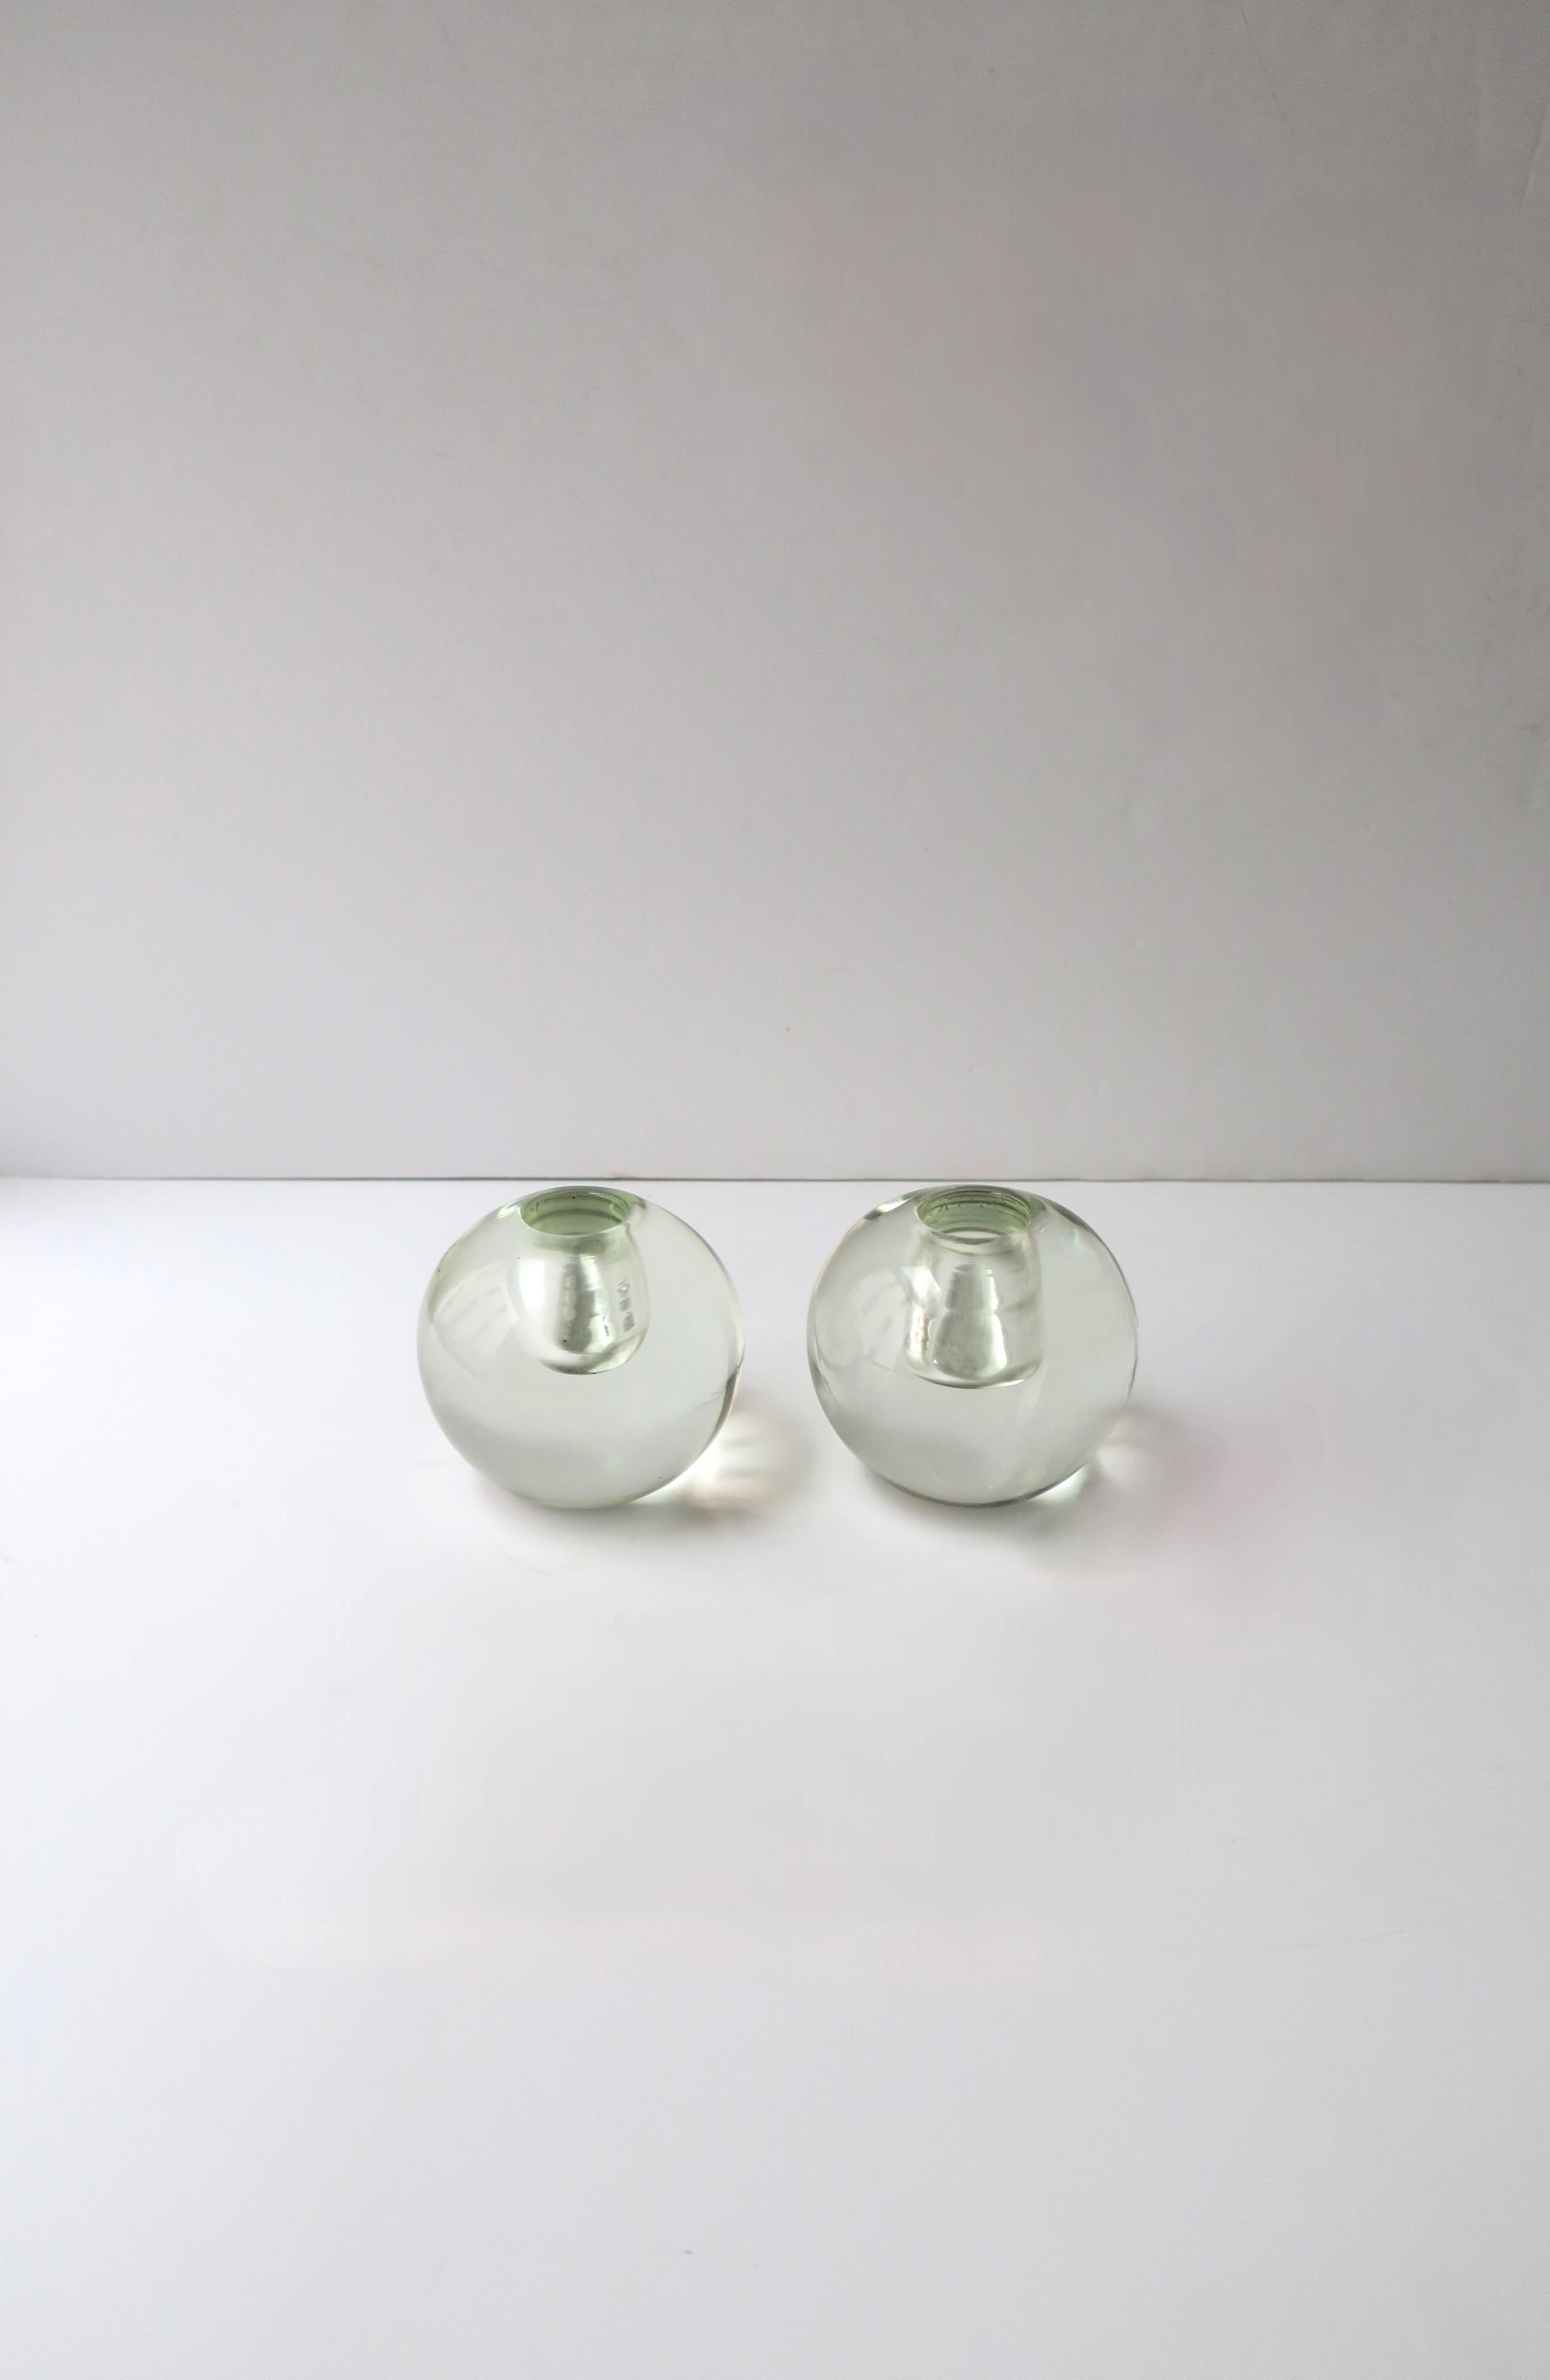 Polished Modern Glass Sphere Candlesticks Holders, Pair For Sale